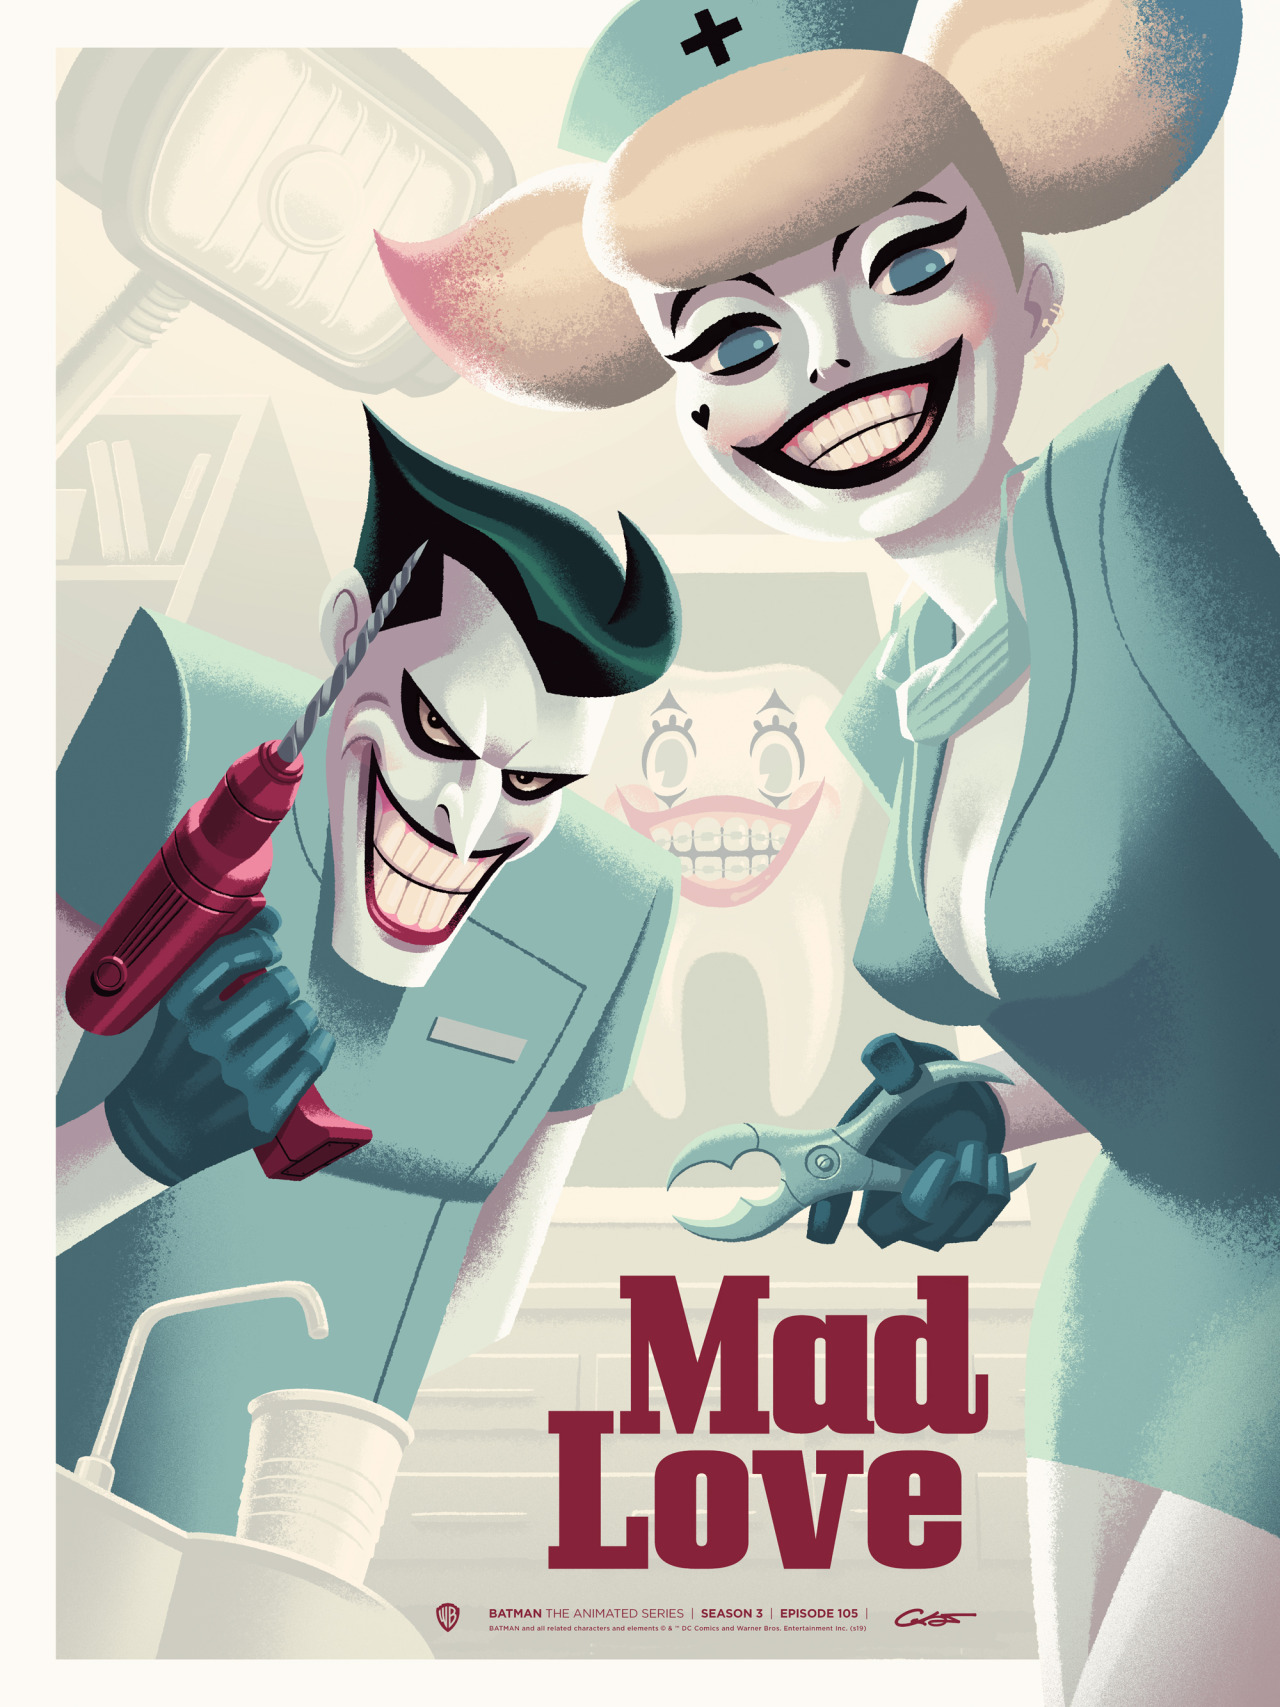 GEORGE CALTSOUDAS — My poster for Episode 105 of Batman The Animated...